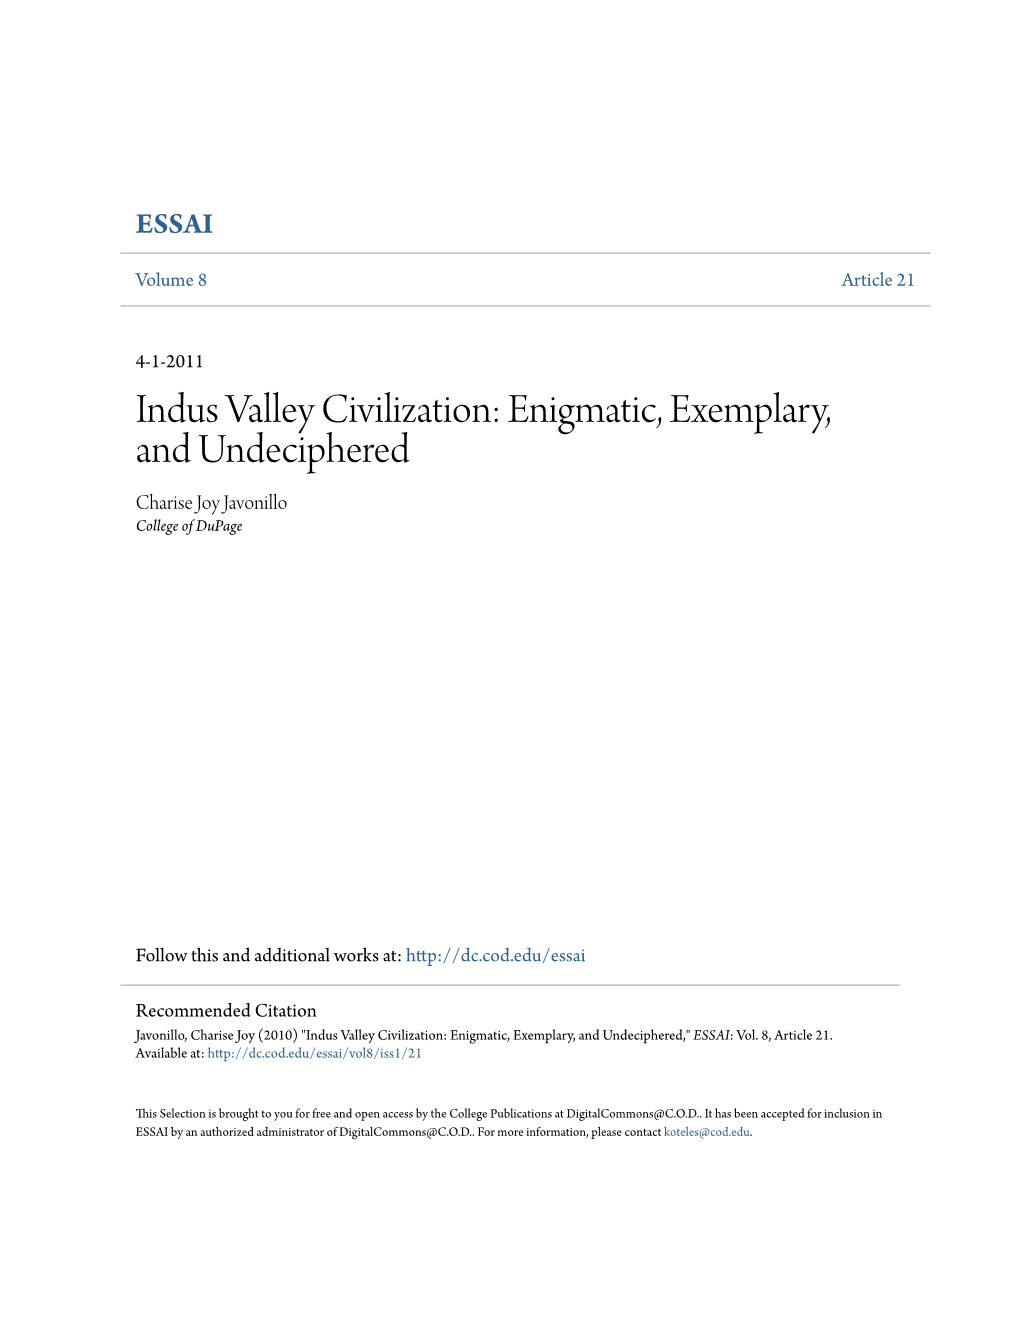 Indus Valley Civilization: Enigmatic, Exemplary, and Undeciphered Charise Joy Javonillo College of Dupage